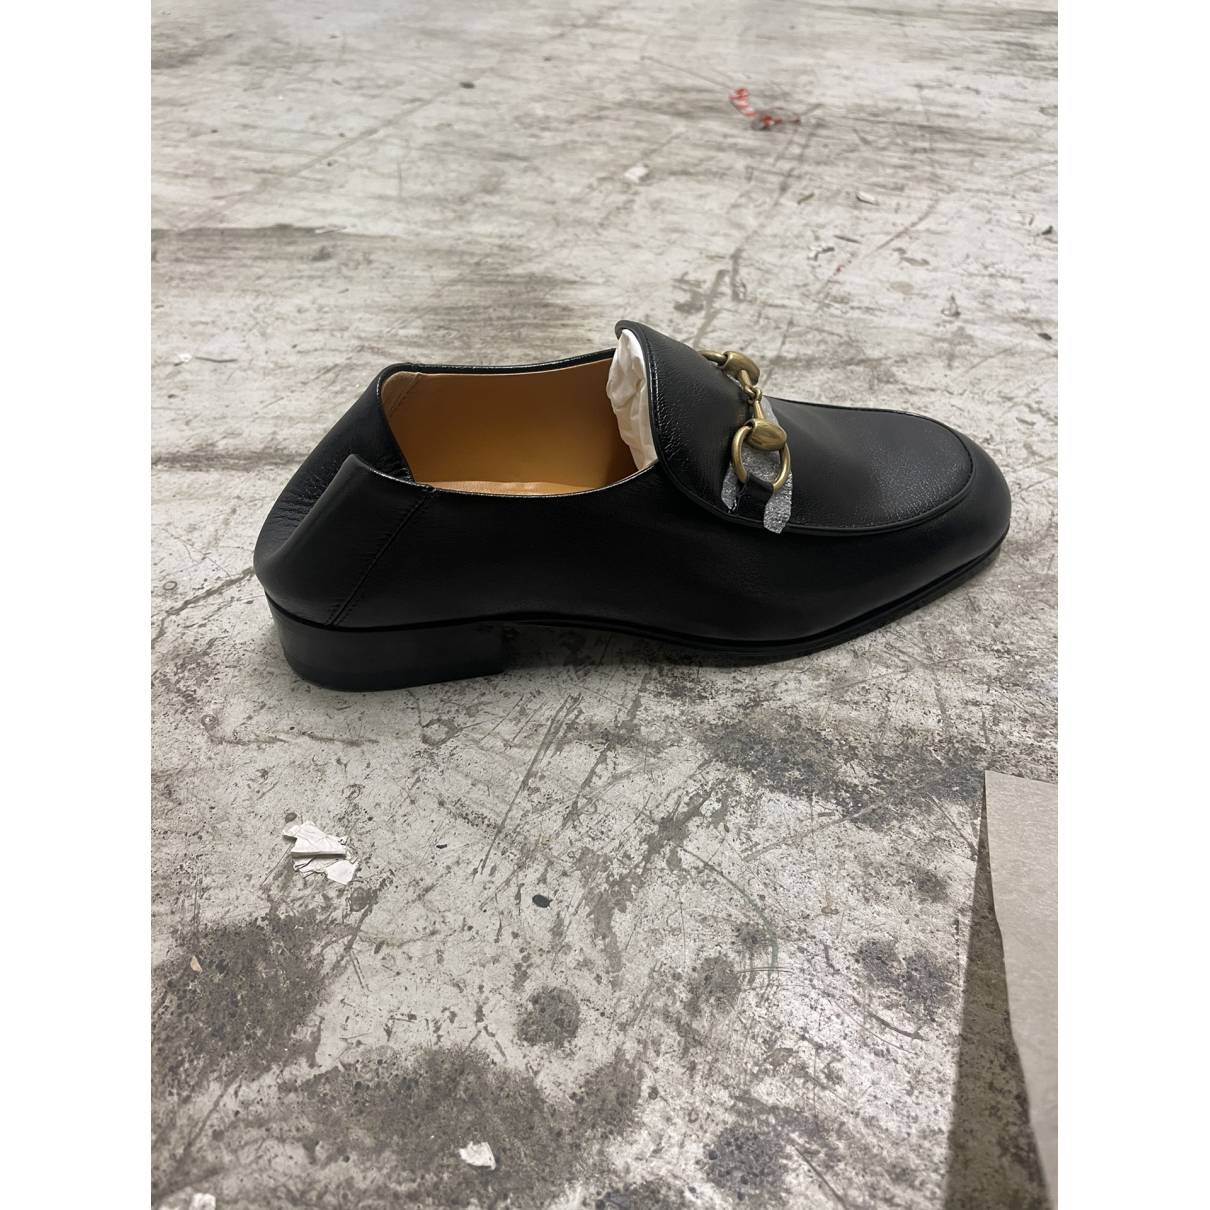 Buy Gucci Sylvie leather flats online